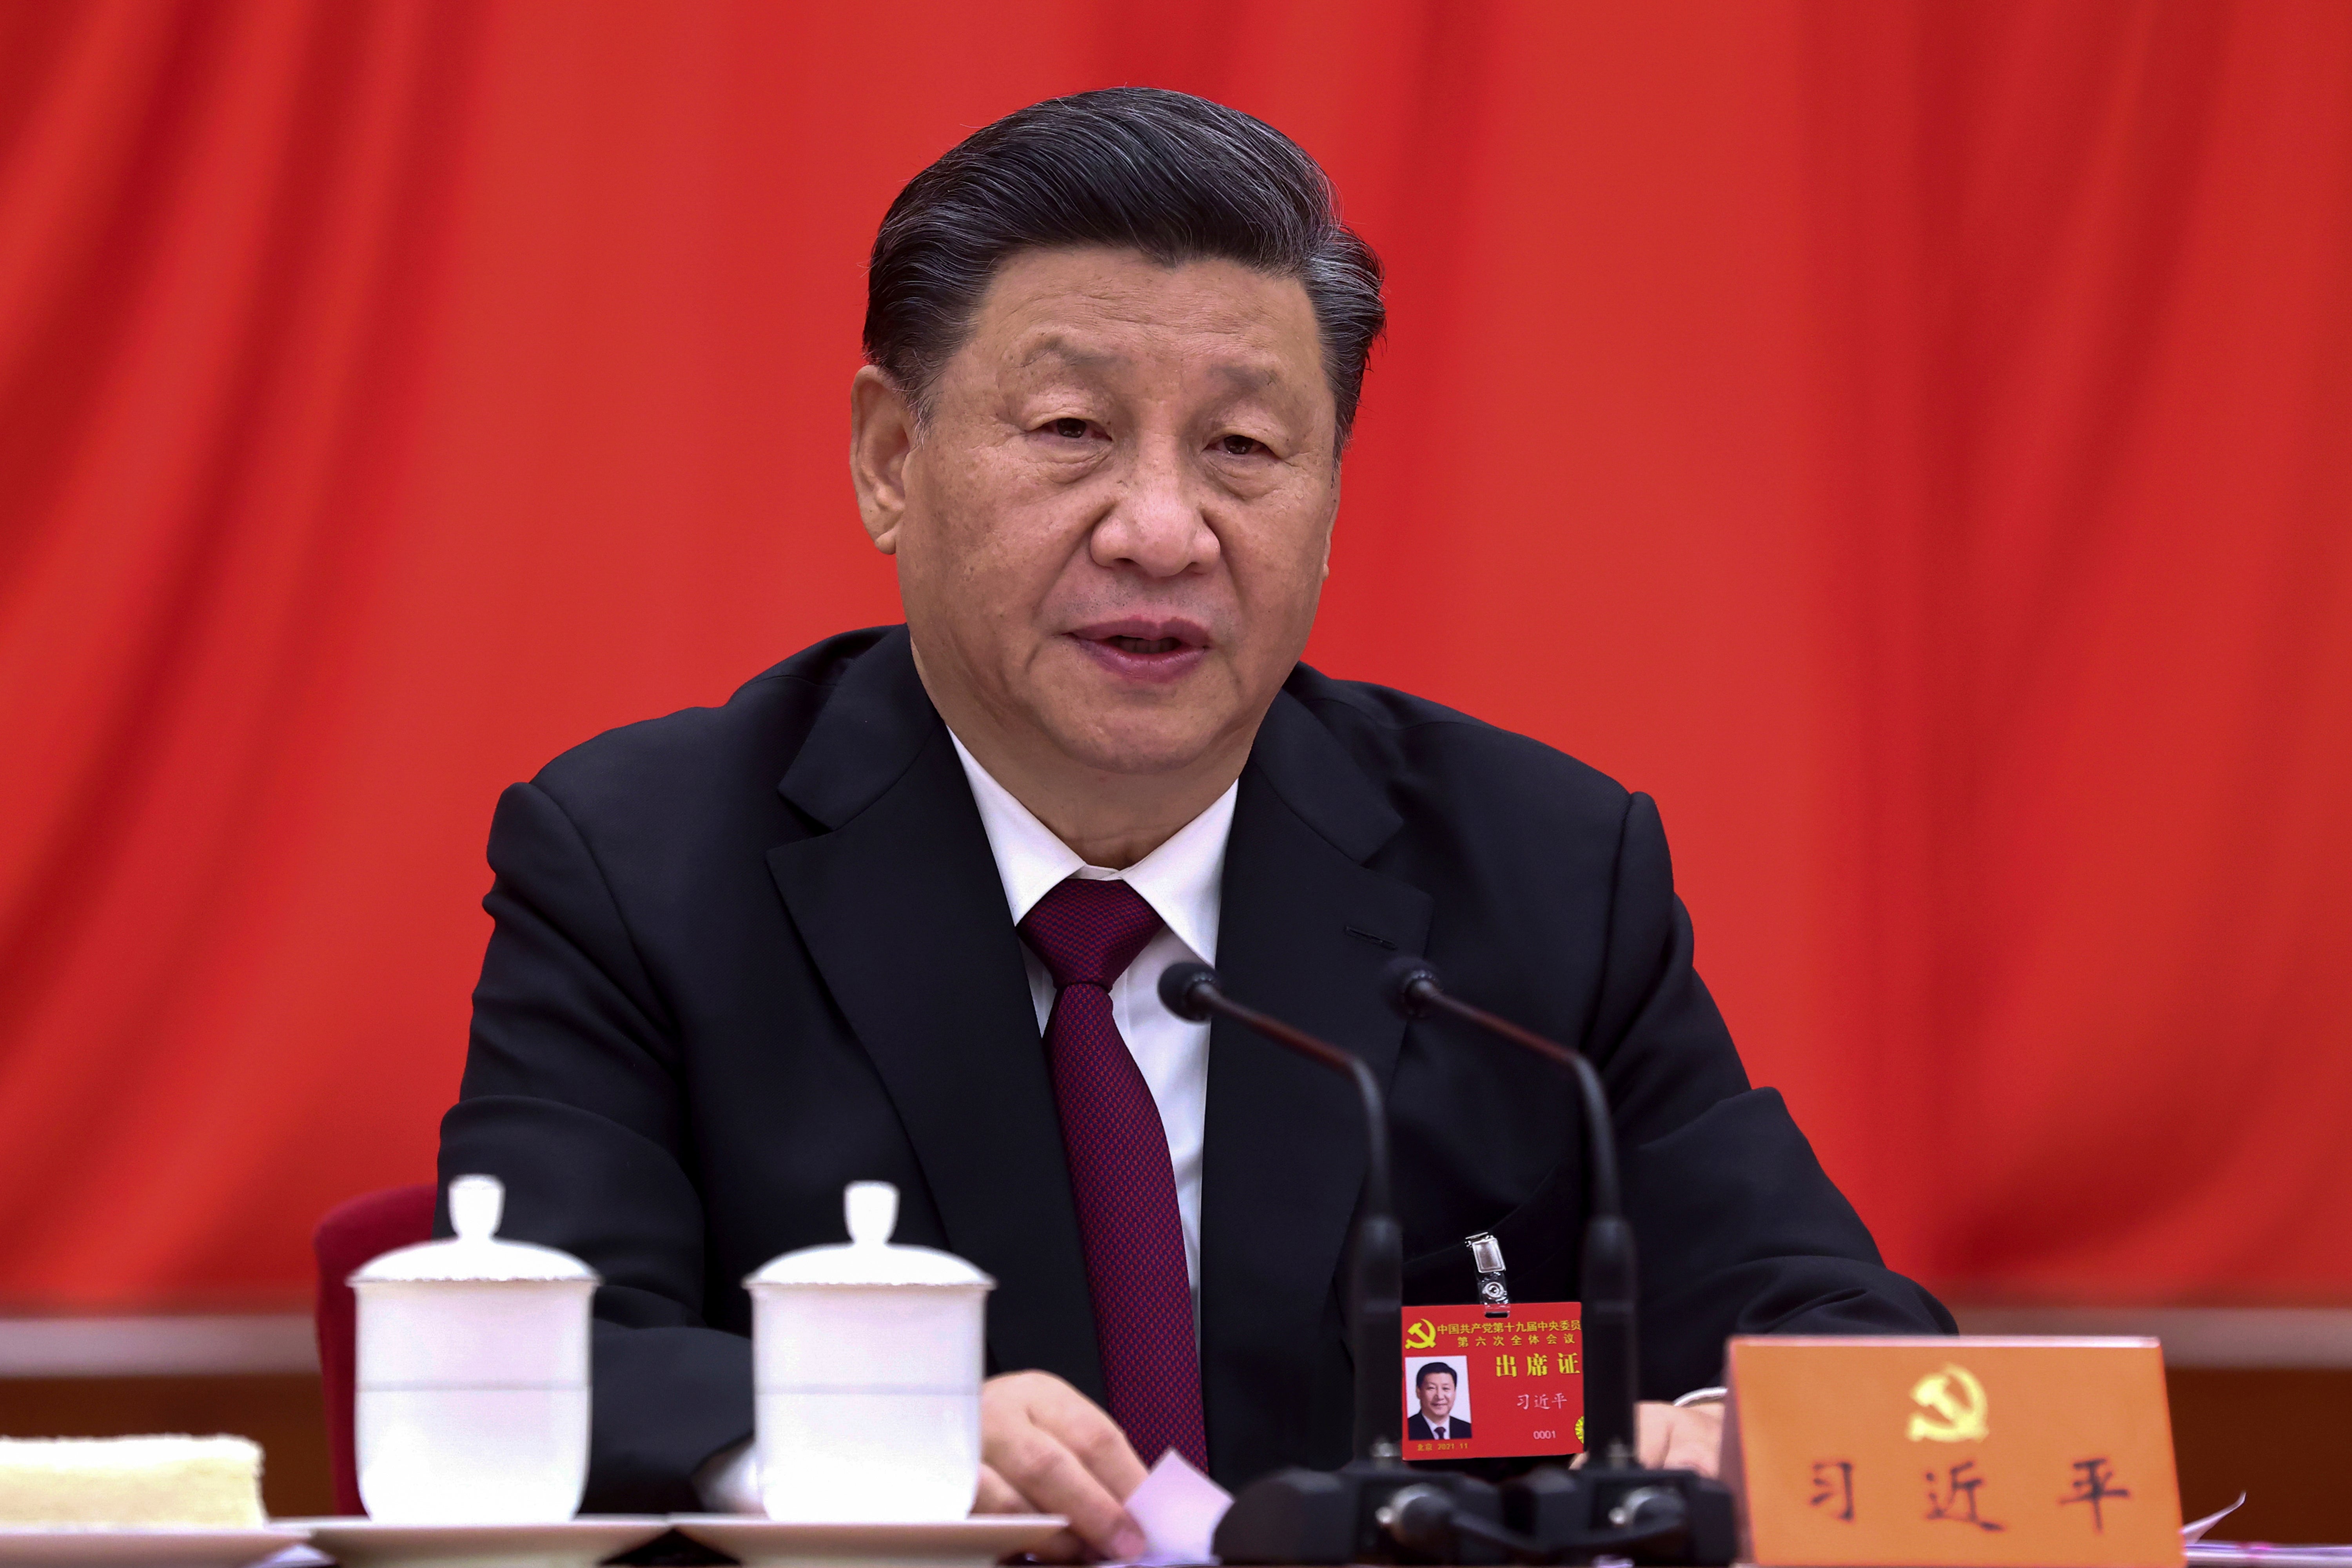 Chinese President Xi Jinping speaks at a conference